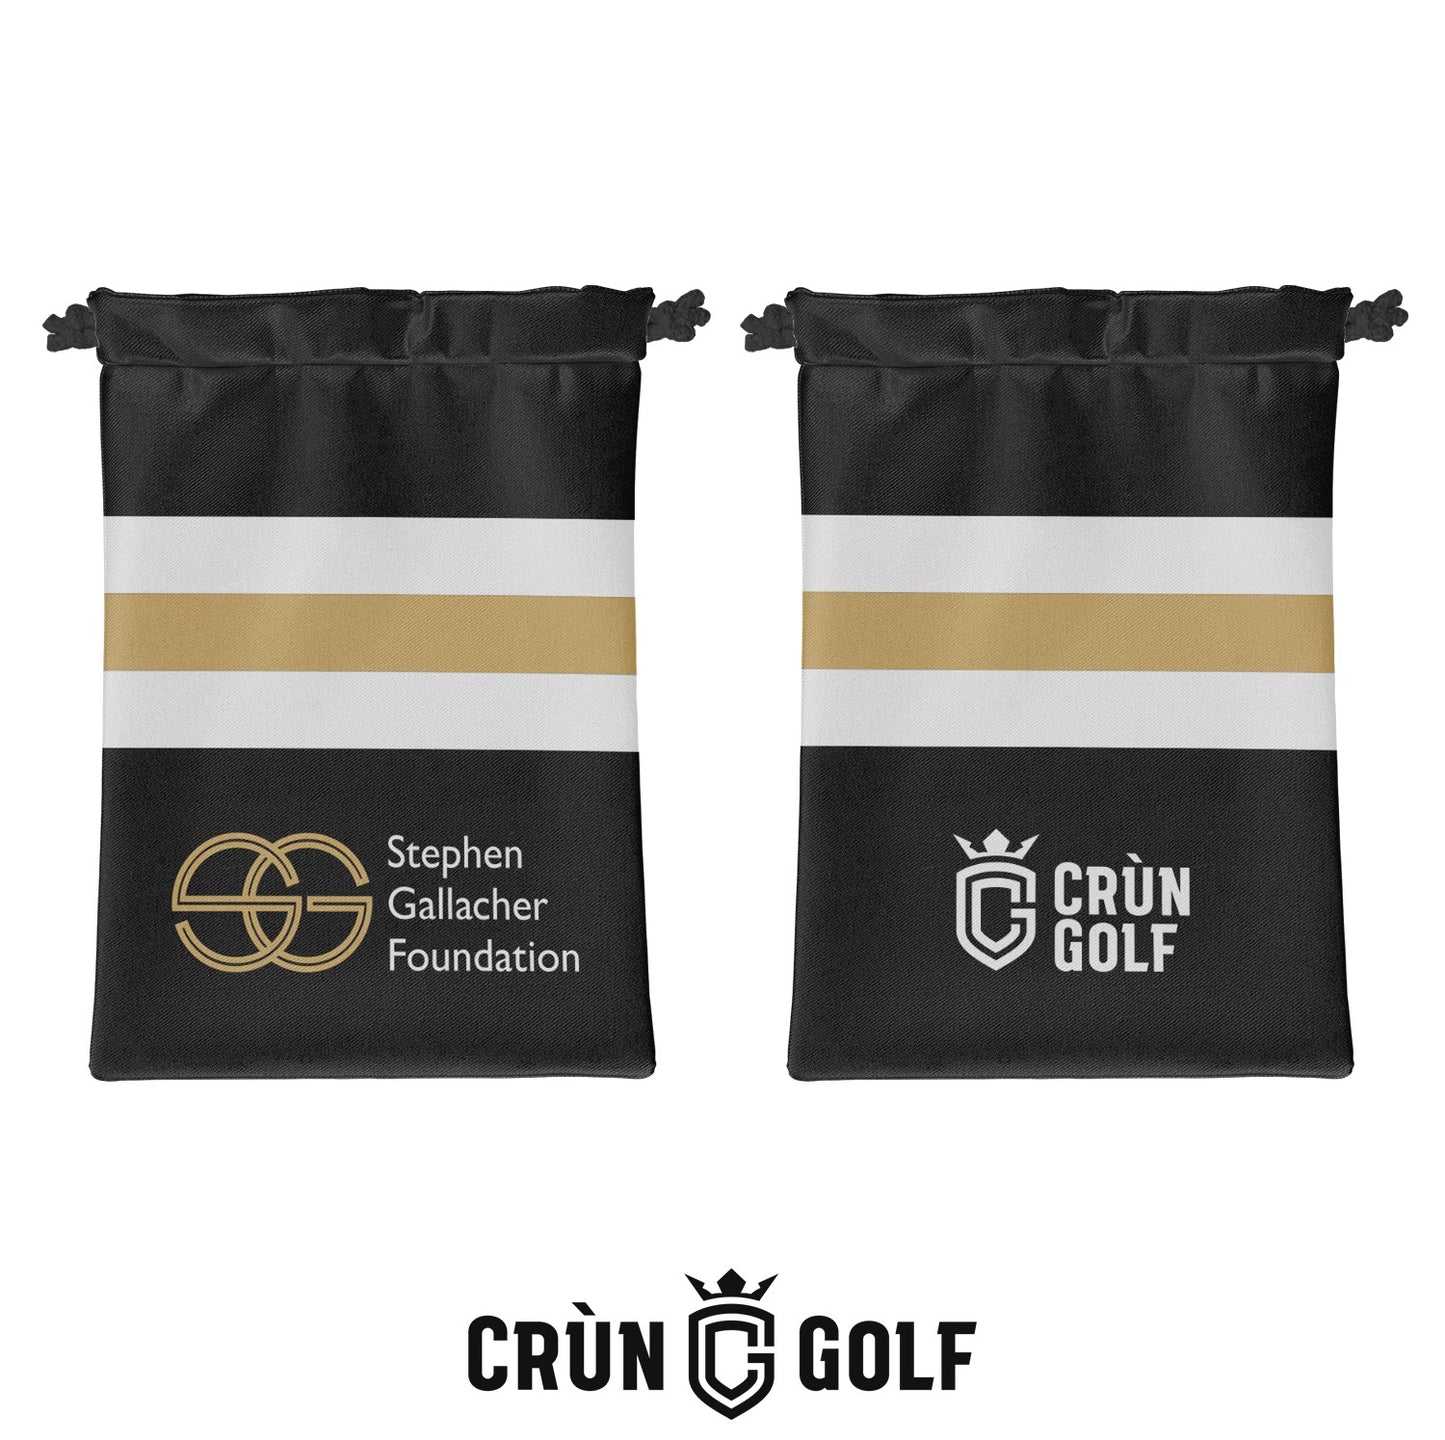 Stephen Gallacher Foundation Striped Valuables Pouch - Black / White / Gold